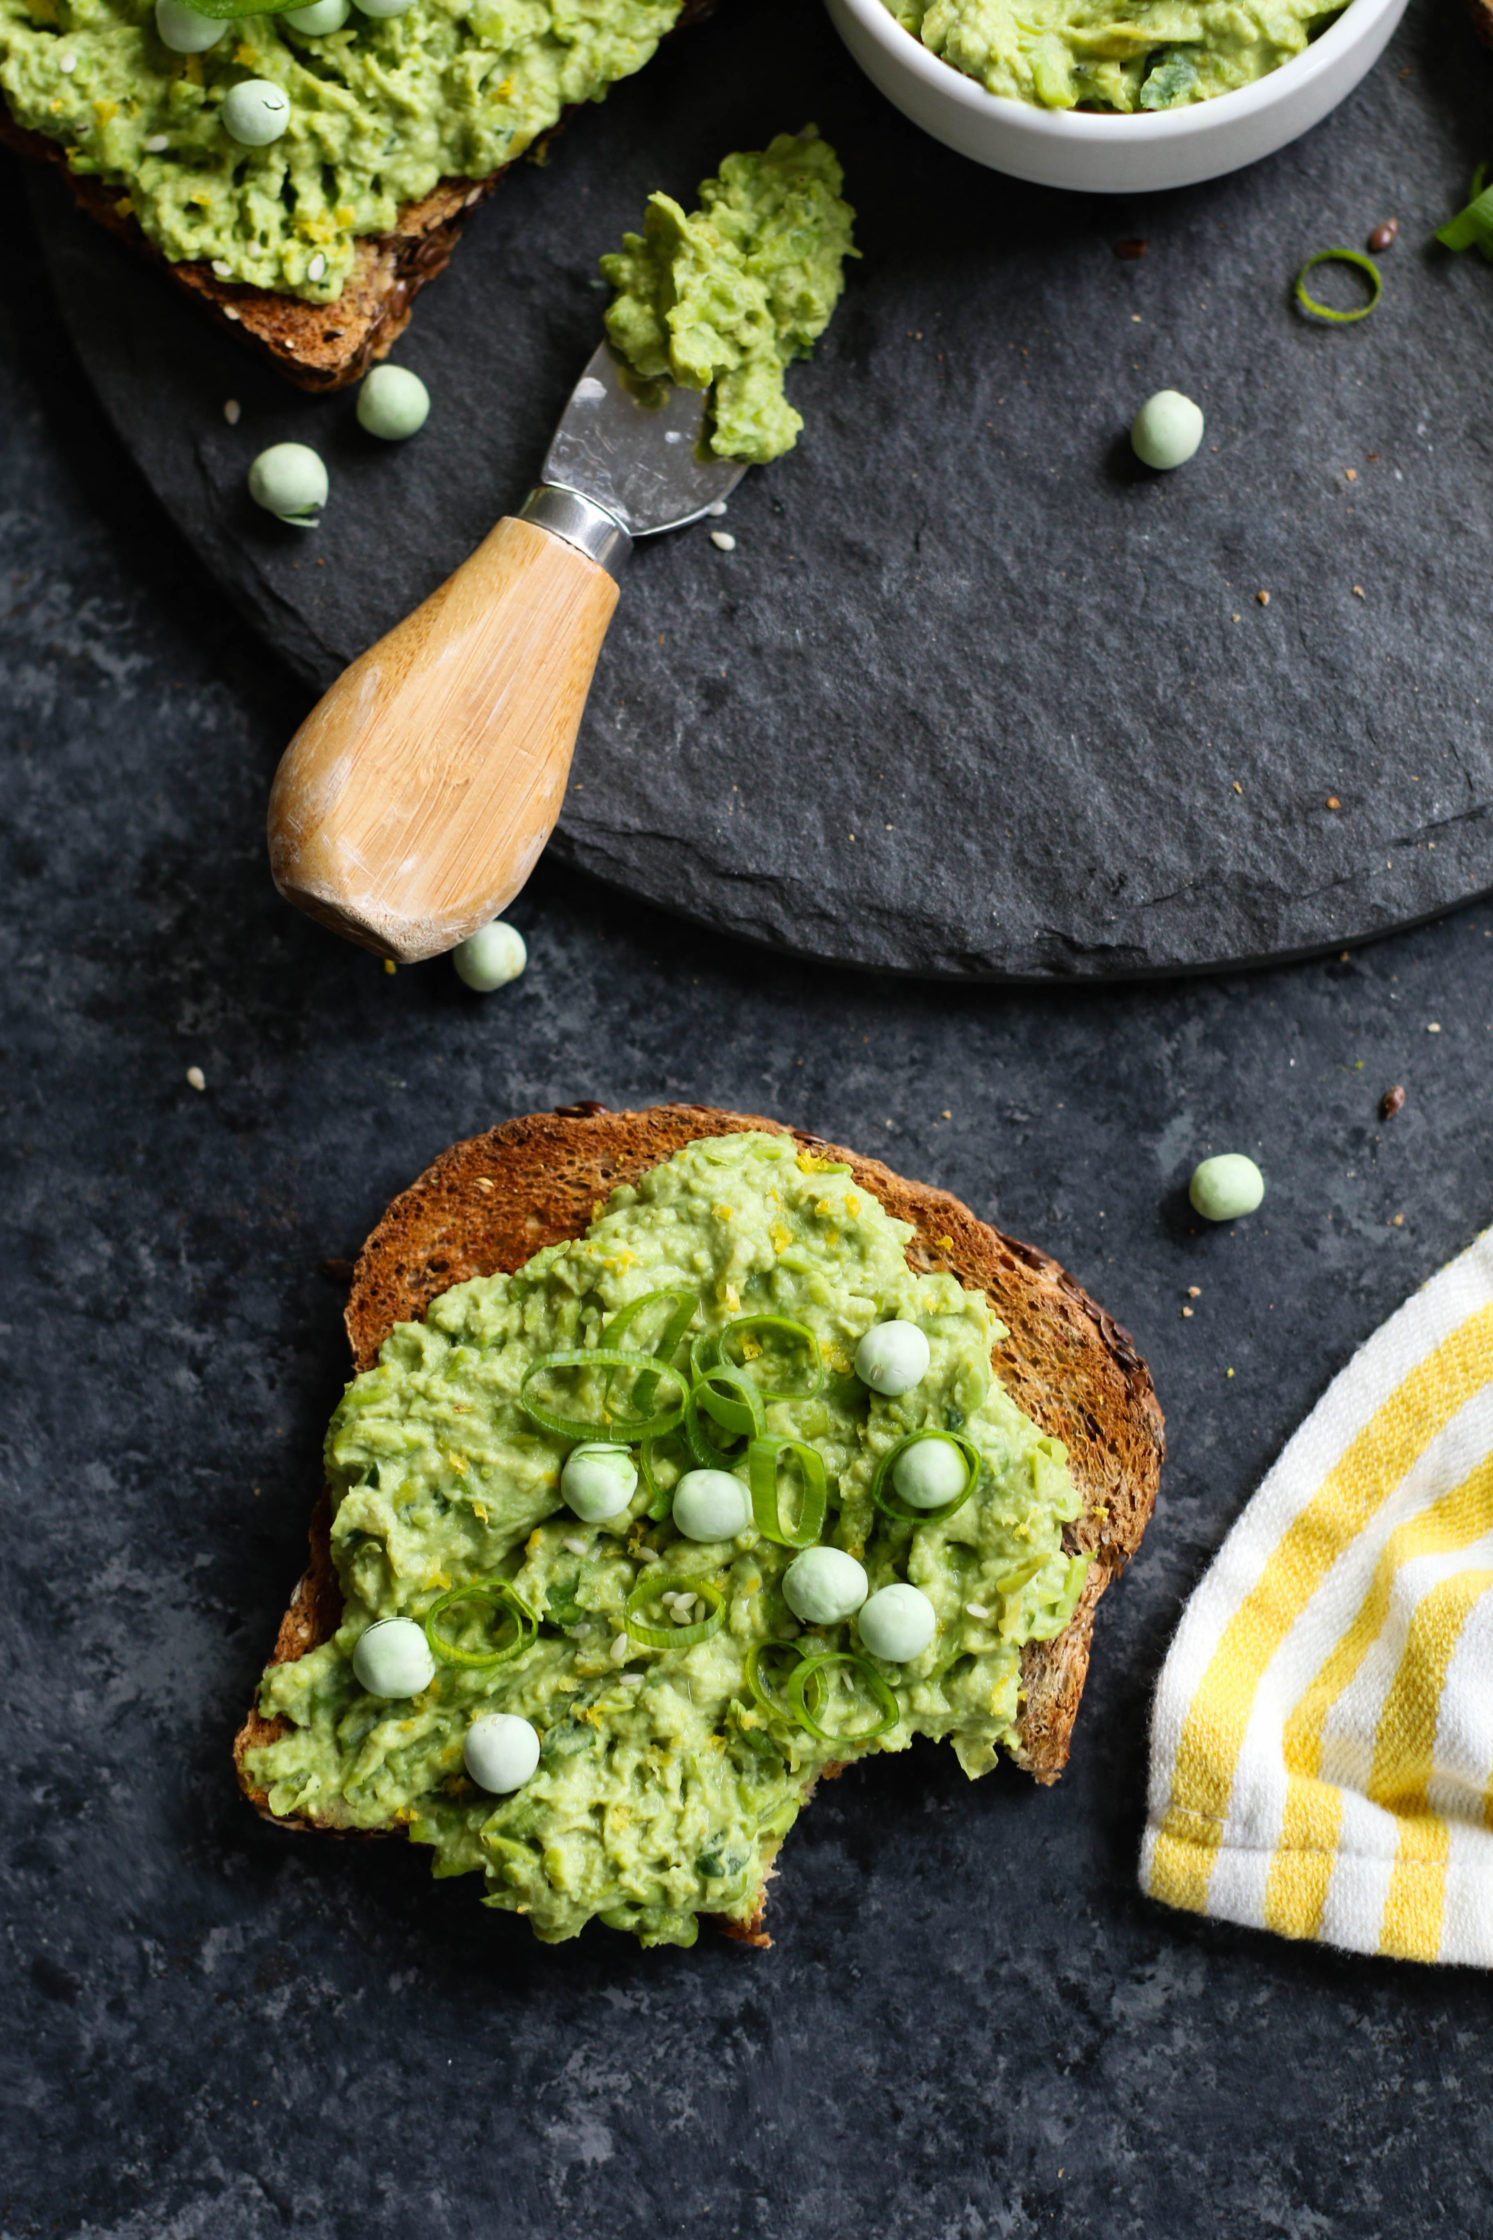 Lemon-y Smashed Pea Toasts by Flora & Vino